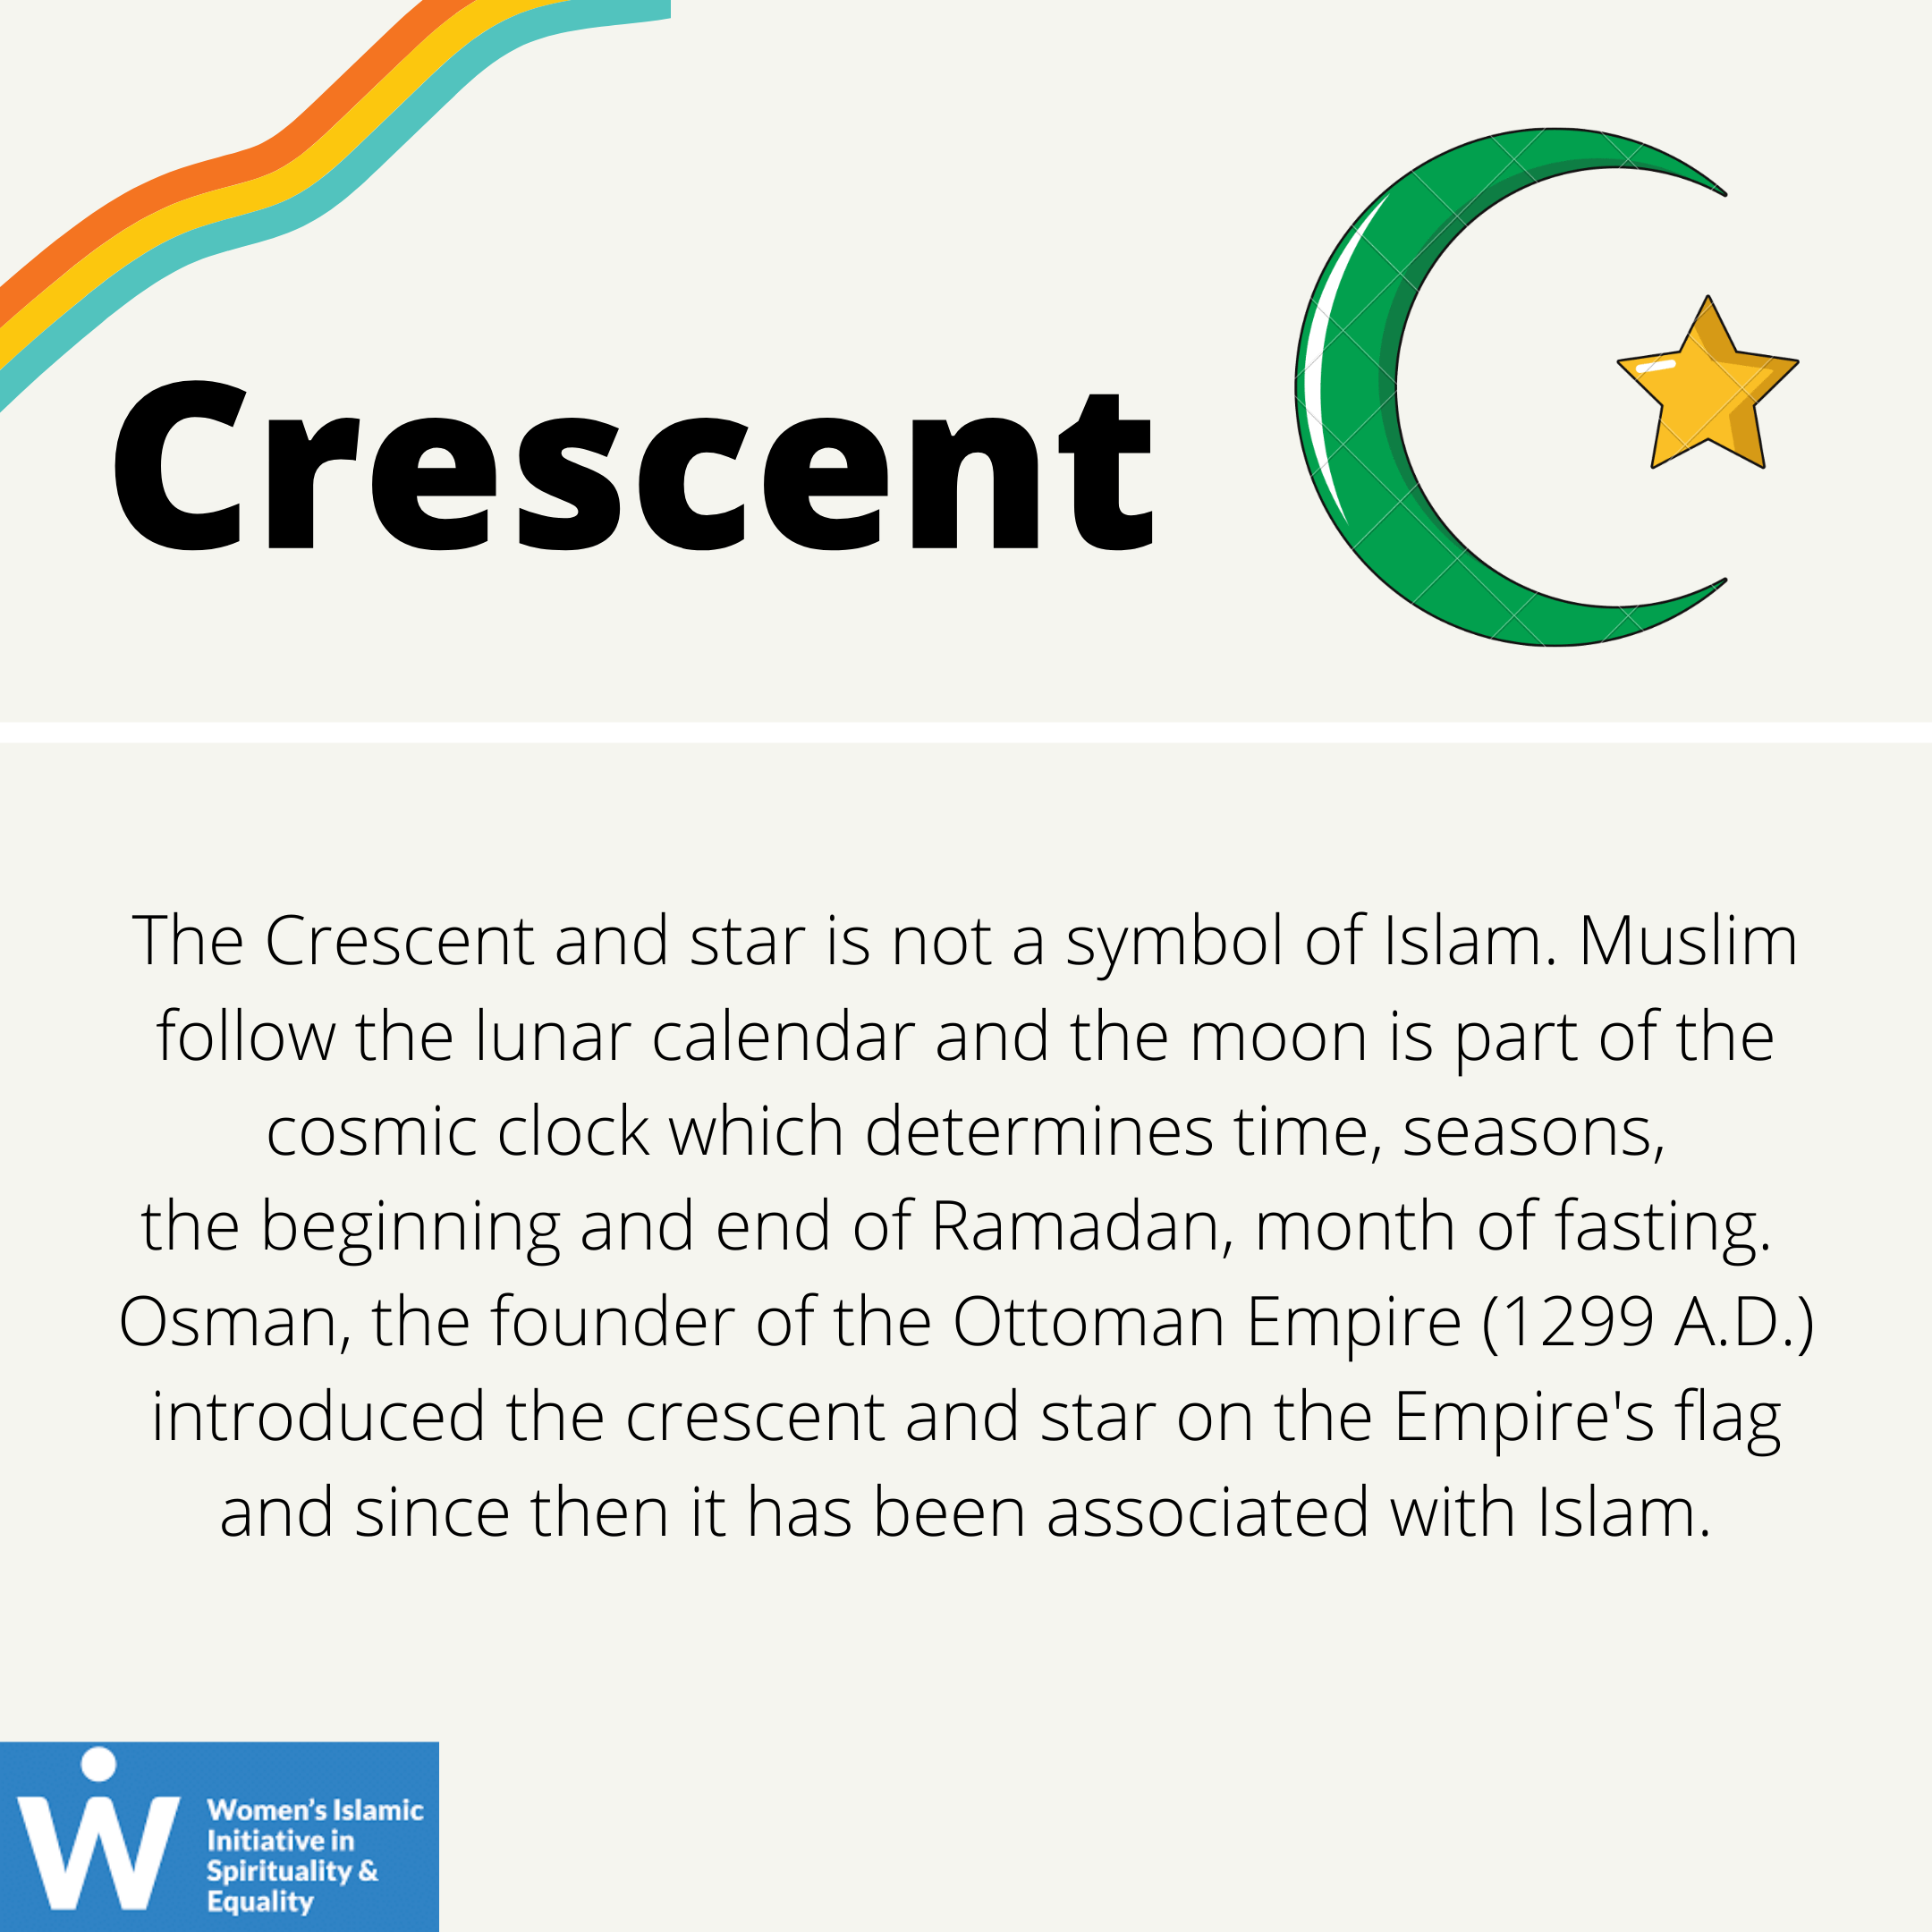 &quot;Crescent: the Cresent and star is not a symbol of Islam. Muslim follow the lunar calendar and the moon is part of the cosmic clock which determines time, seasons, the beginning and end of Ramadan, a month of fasting. Osman, the founder of the Ottoman Empire (1299 AD) introduced the crescent and star on their flags and since then it has been associated with Islam.&quot;